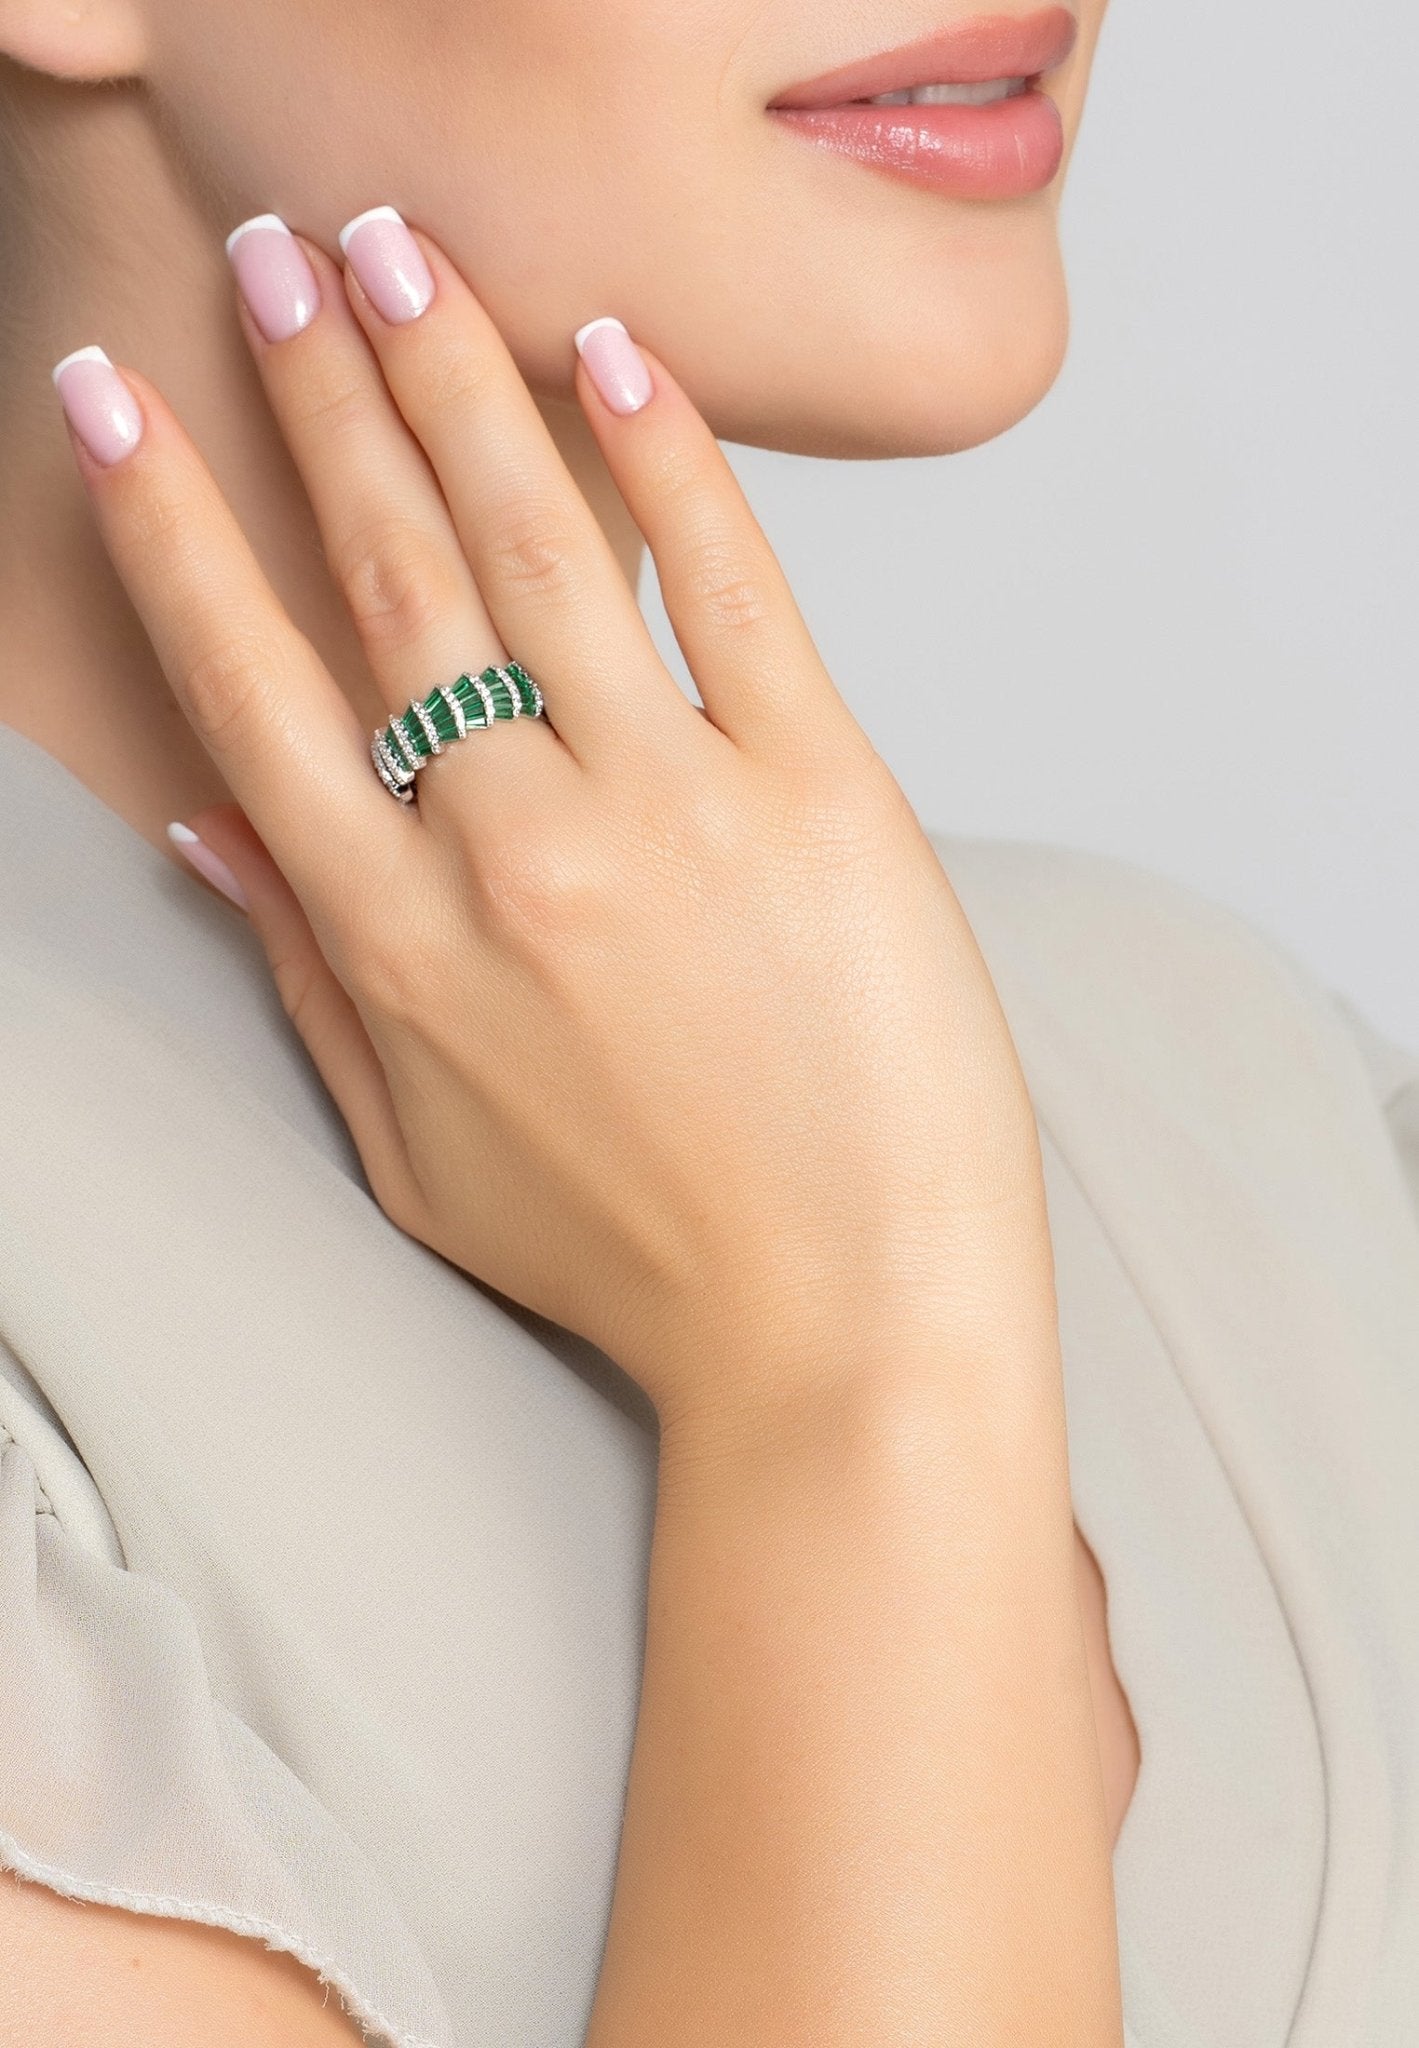 Deco Fantail Cocktail Ring Silver Emerald - LATELITA Rings